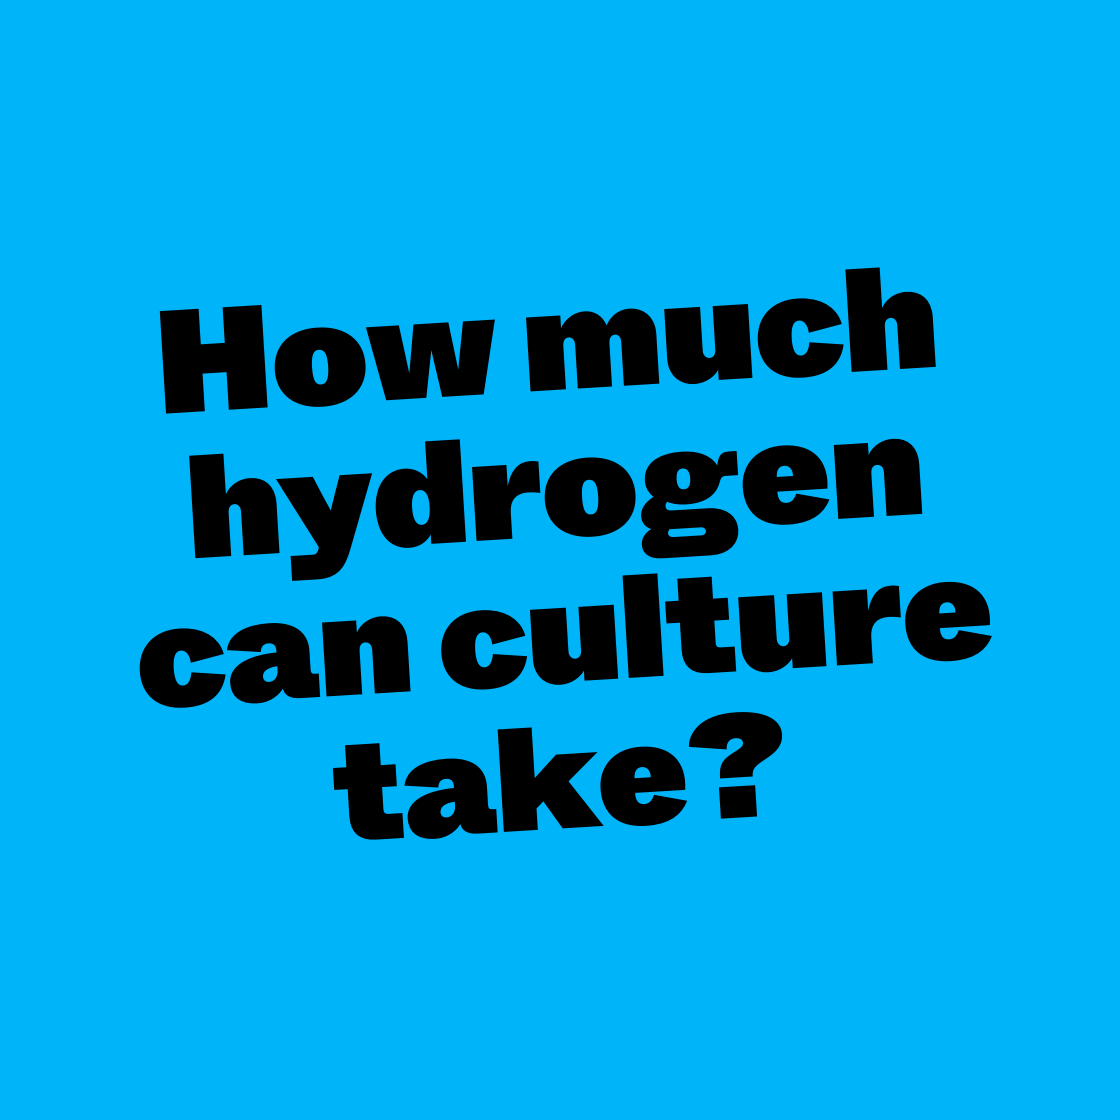 How much hydrogen can culture take?